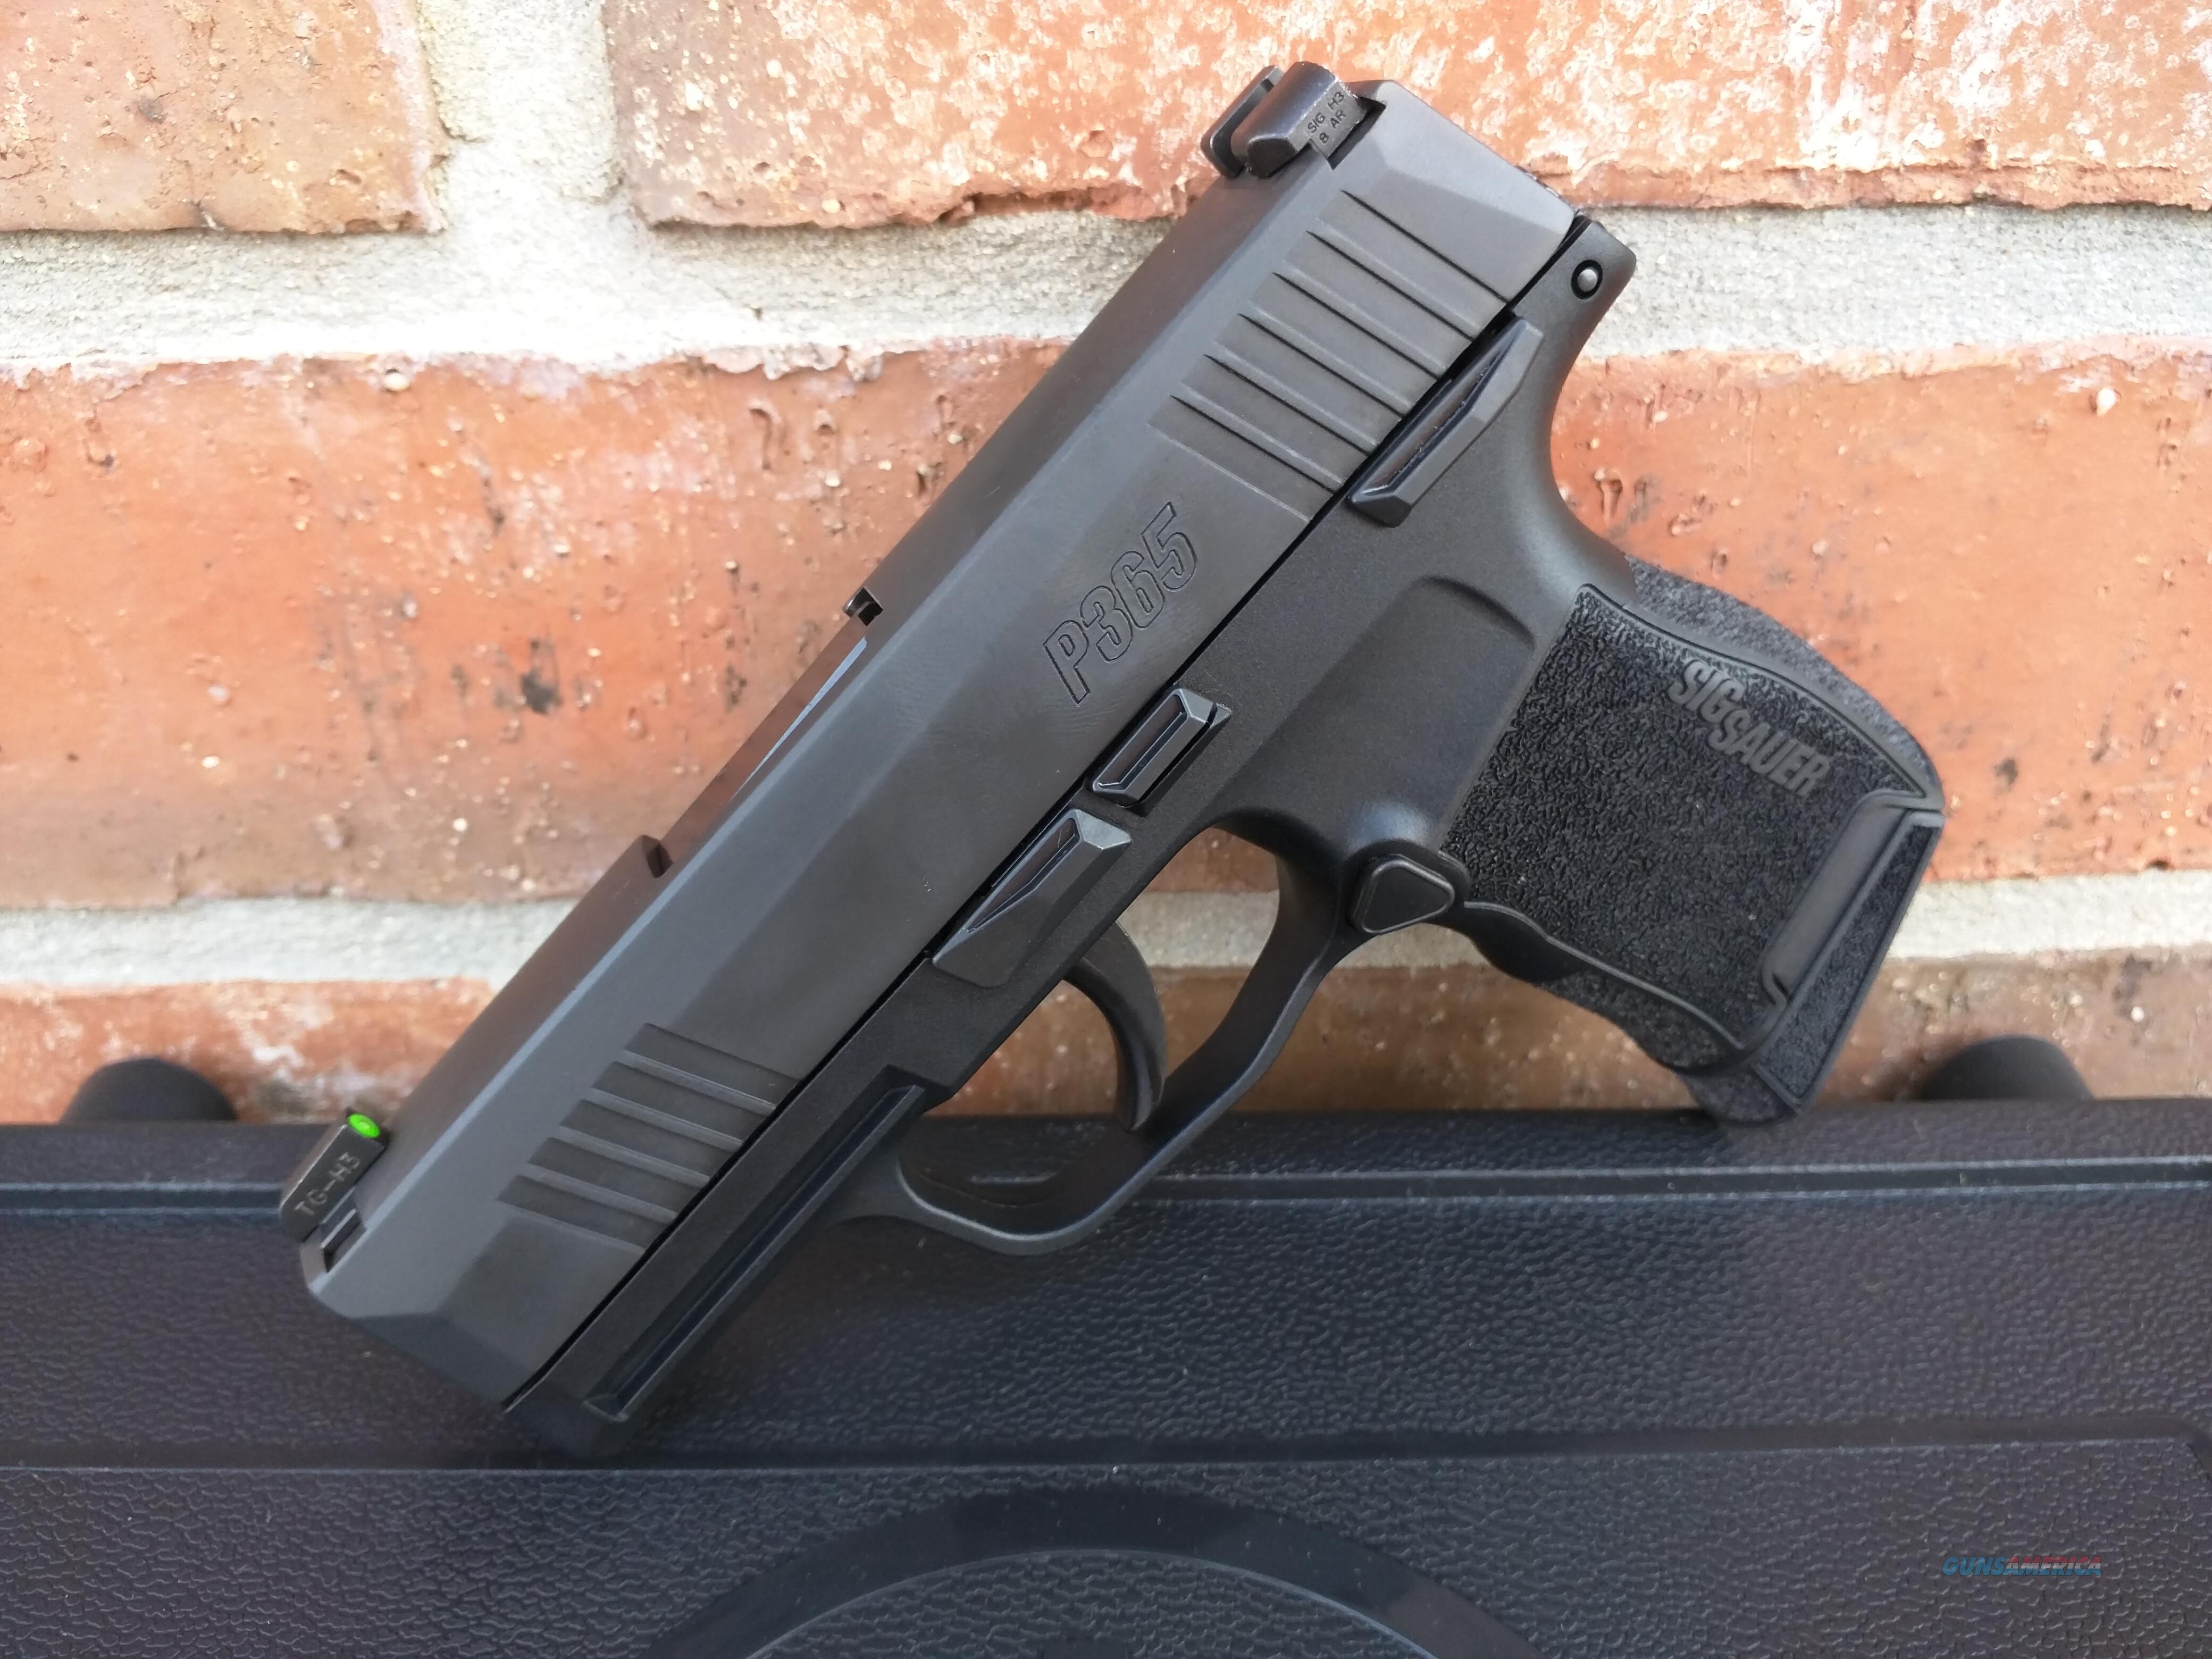 Sig P365 9 BXR3 MS Model with Manua for sale at Gunsamerica com